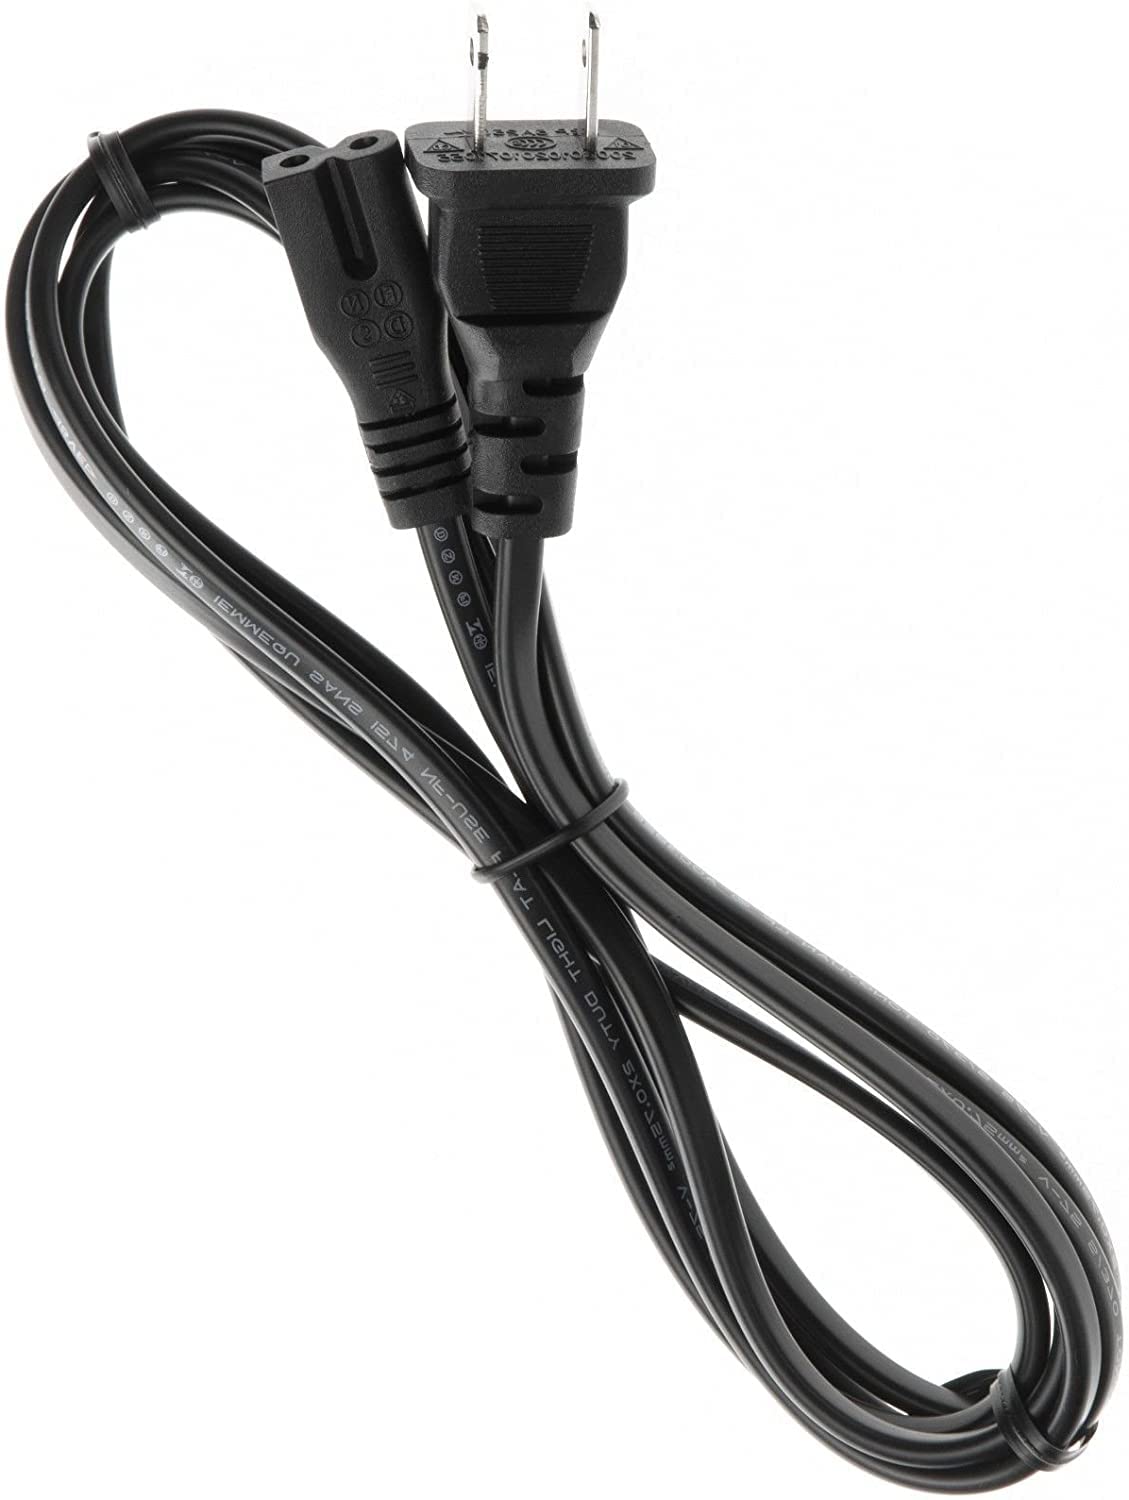 NewPowerGear AC Power plus Lead Cord Cable For BOSE Acoustic Wave music system (model CD3000)